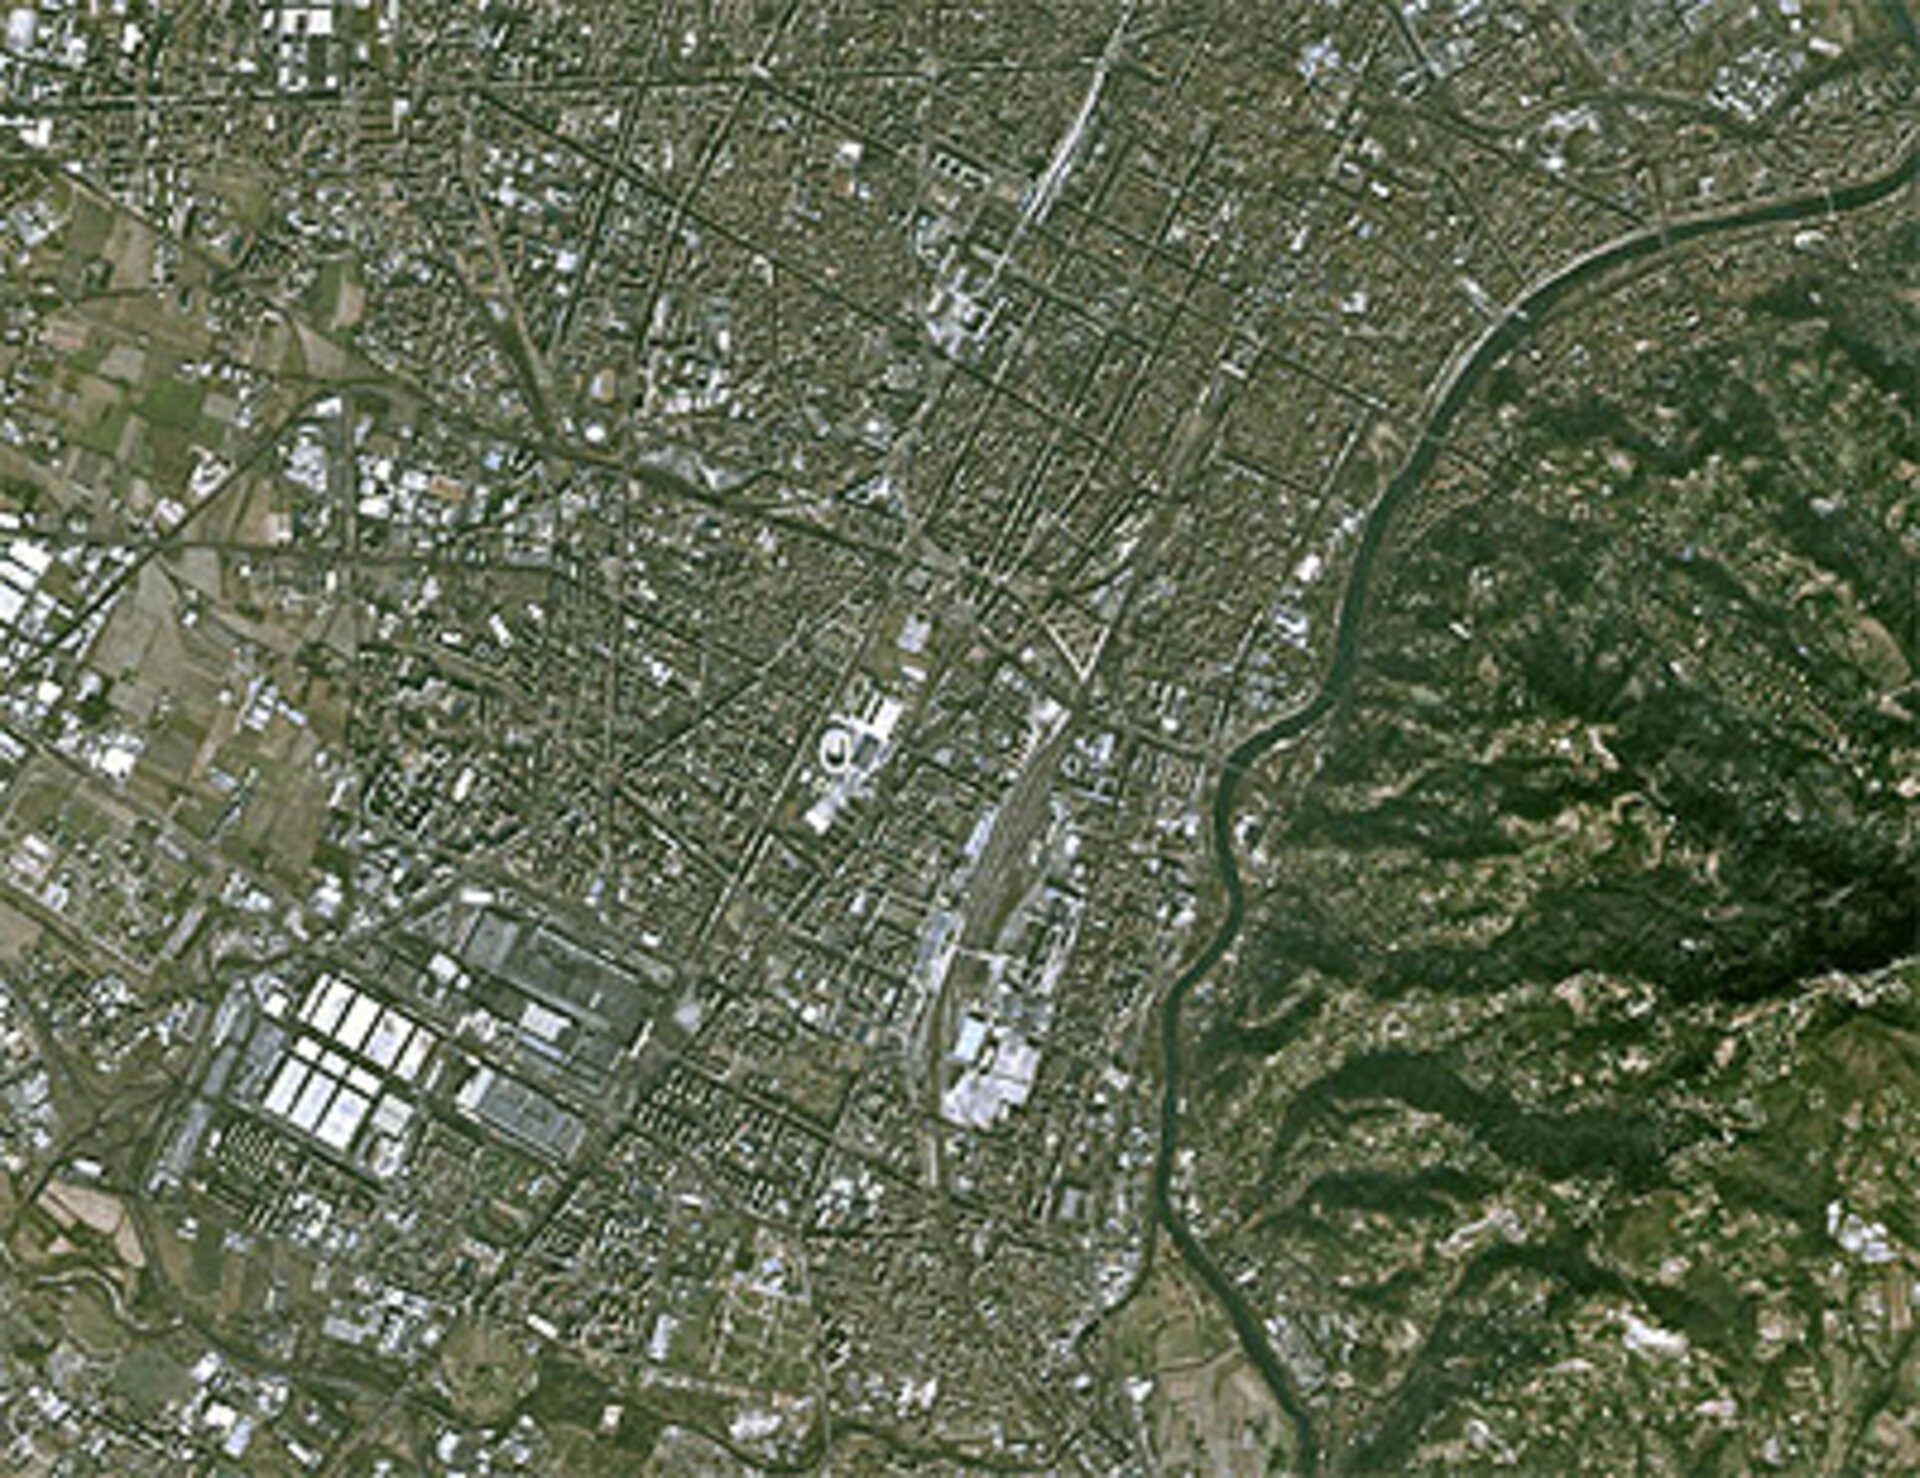 Detail of Spot satellite image showing the Olympic village in Turin